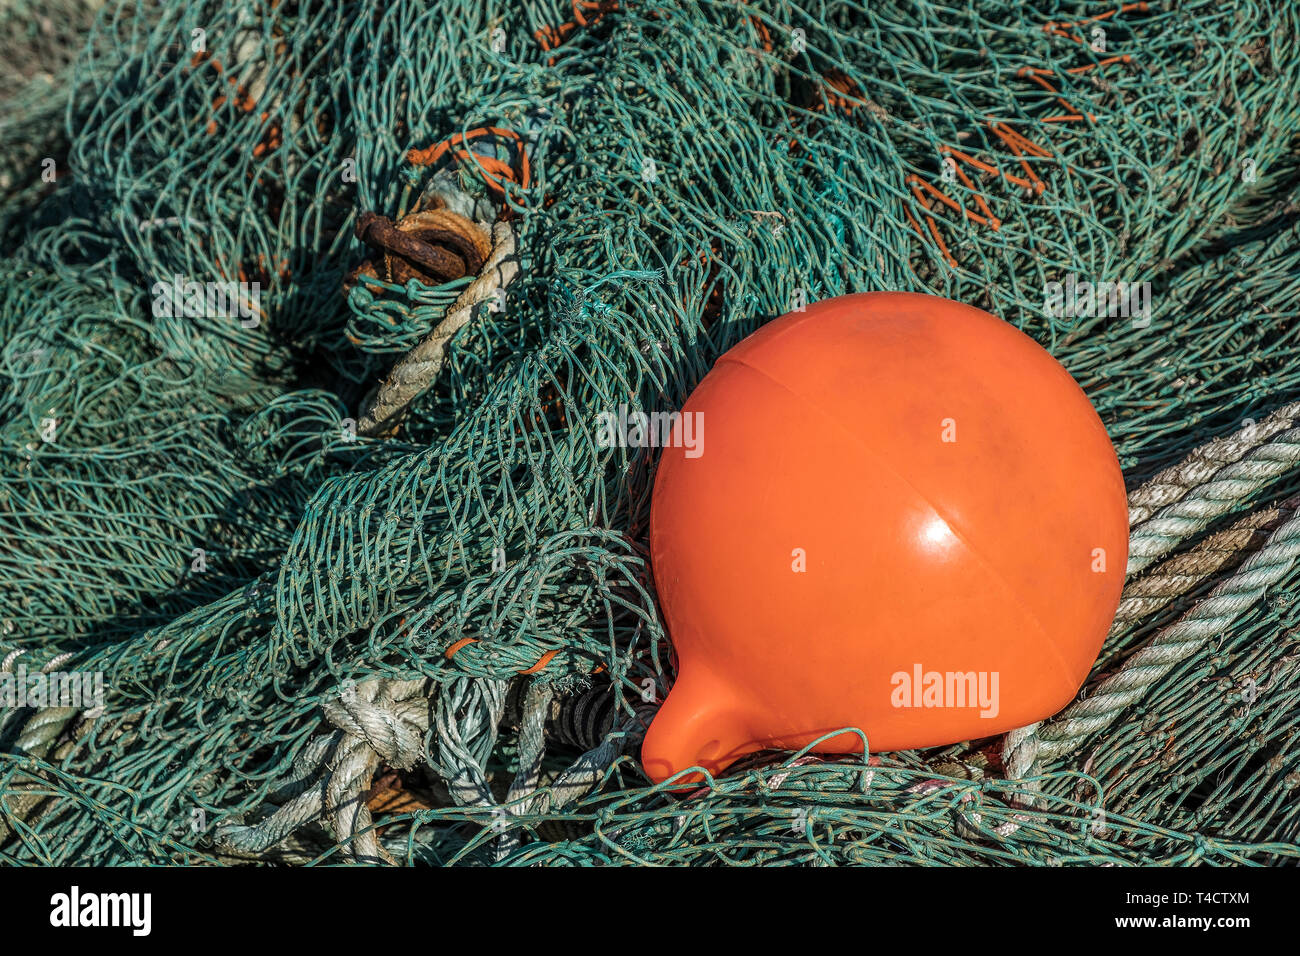 A tangled fishing net with a orange fishing buoy on top. Stock Photo